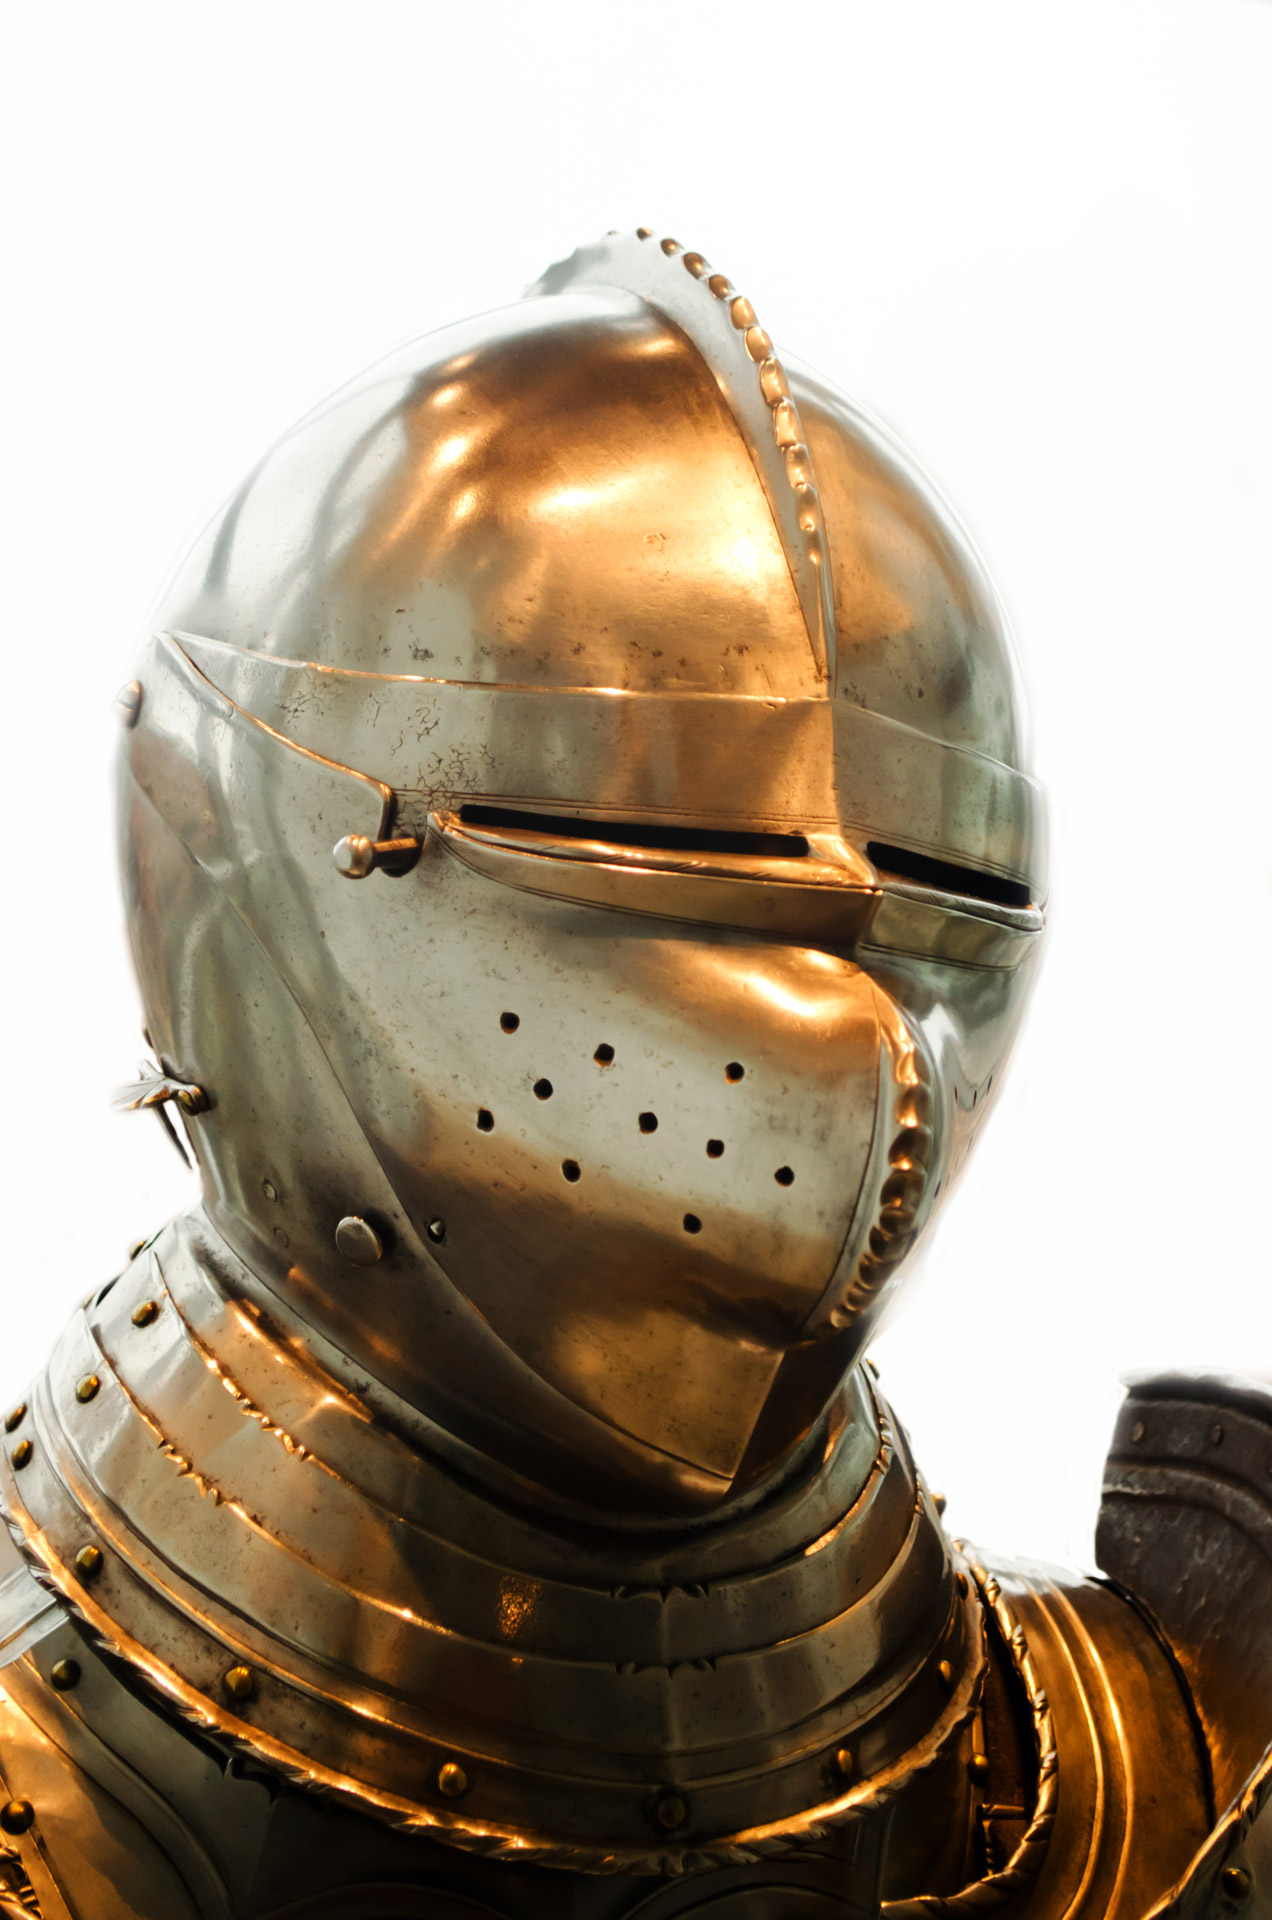 Knight's helmet On The White Background